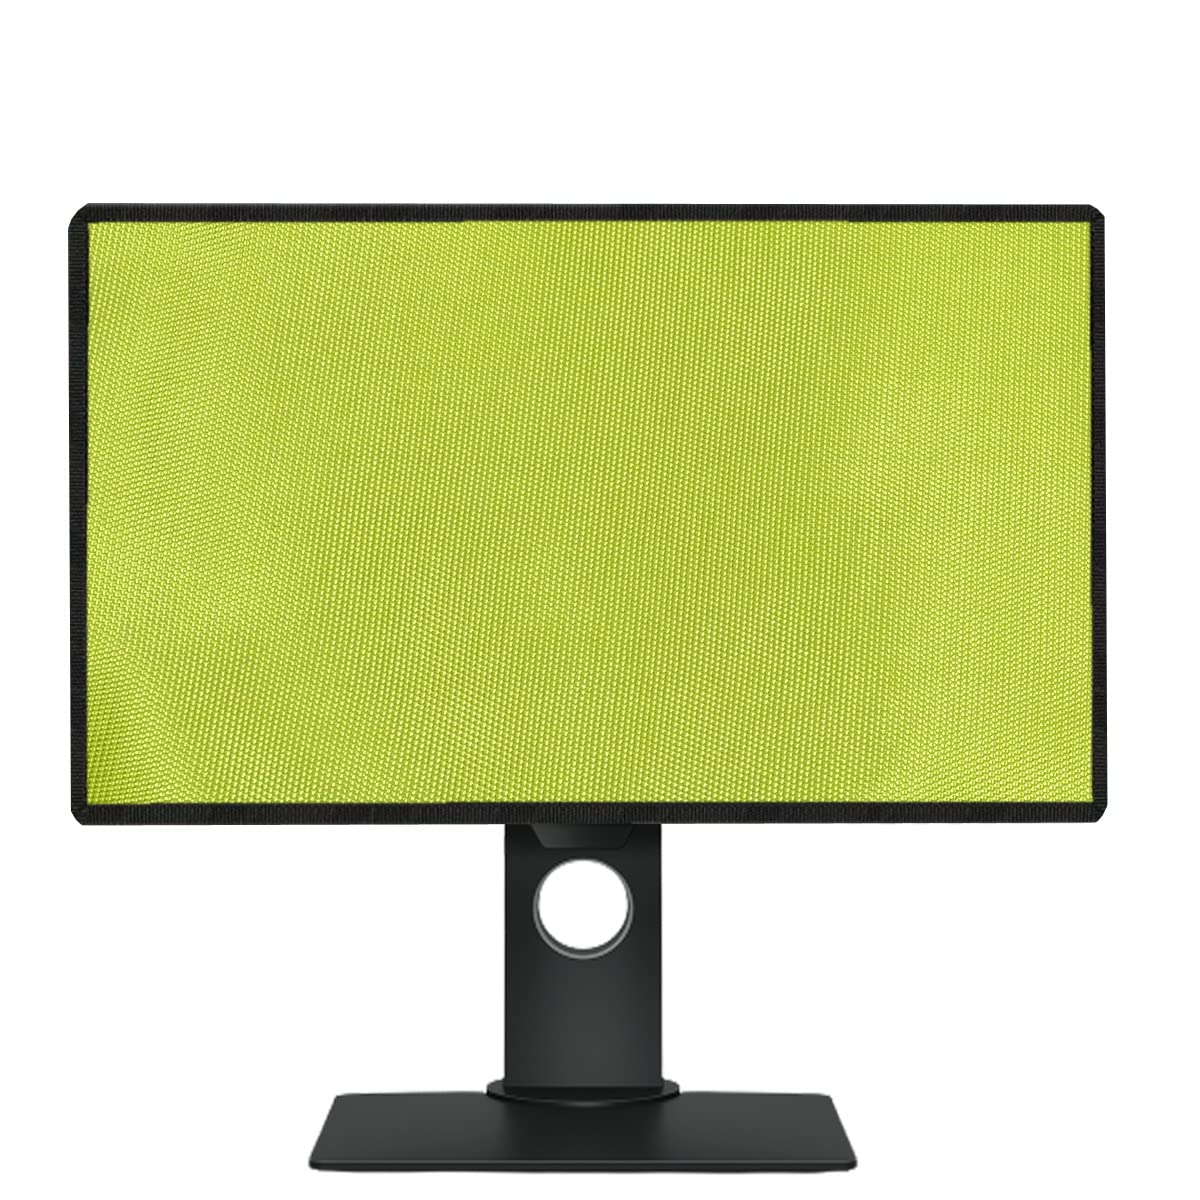 PalaP Super Premium Dust Proof Monitor Cover for Samsung 24 inches Monitor (Green)